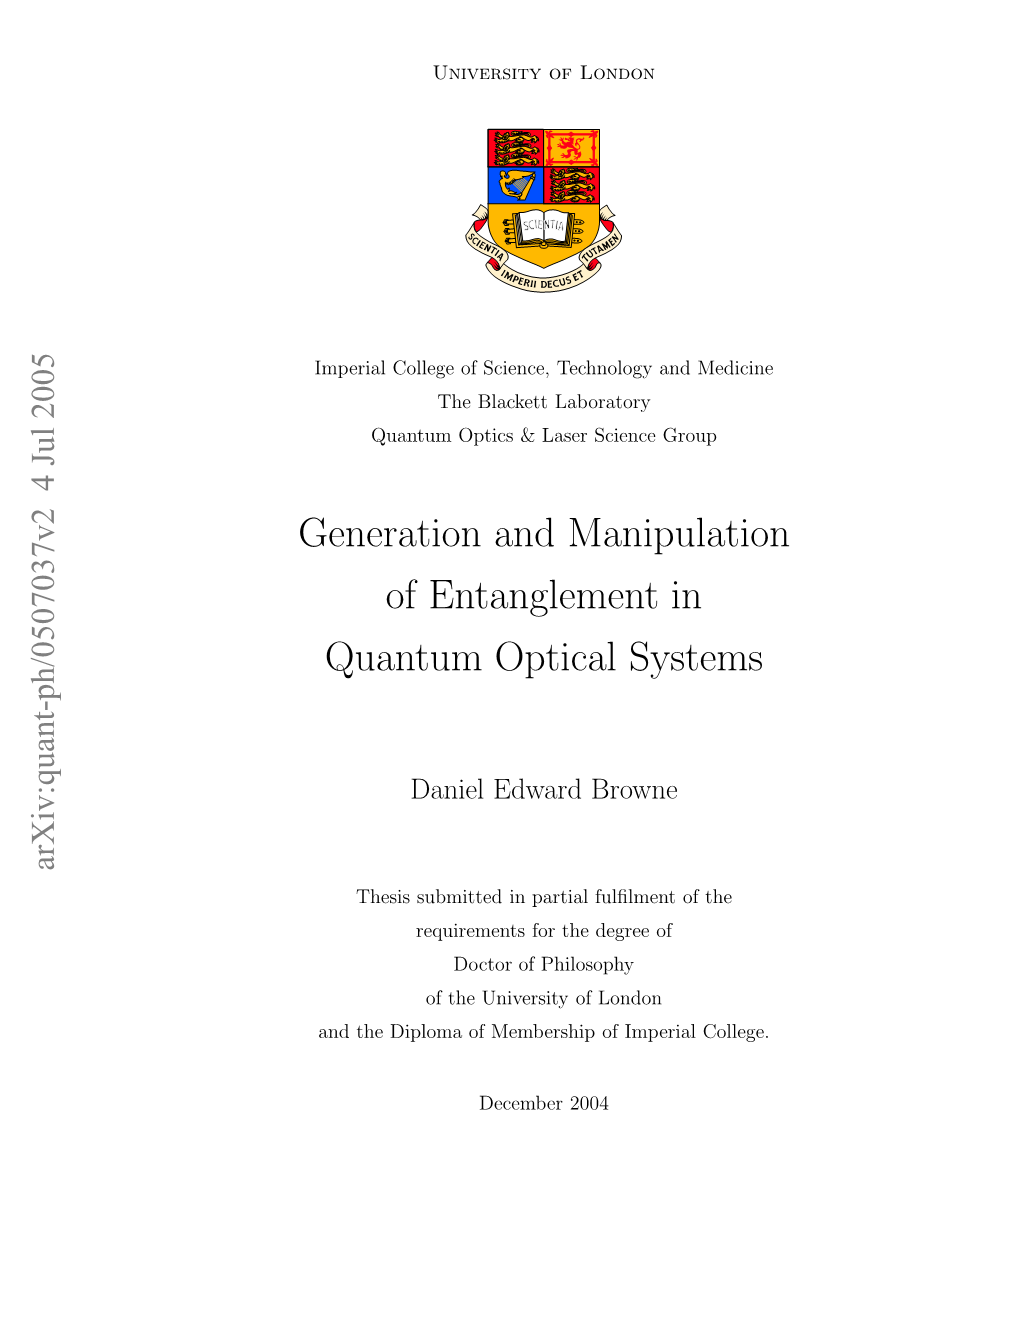 Generation and Manipulation of Entanglement in Quantum Optical Systems